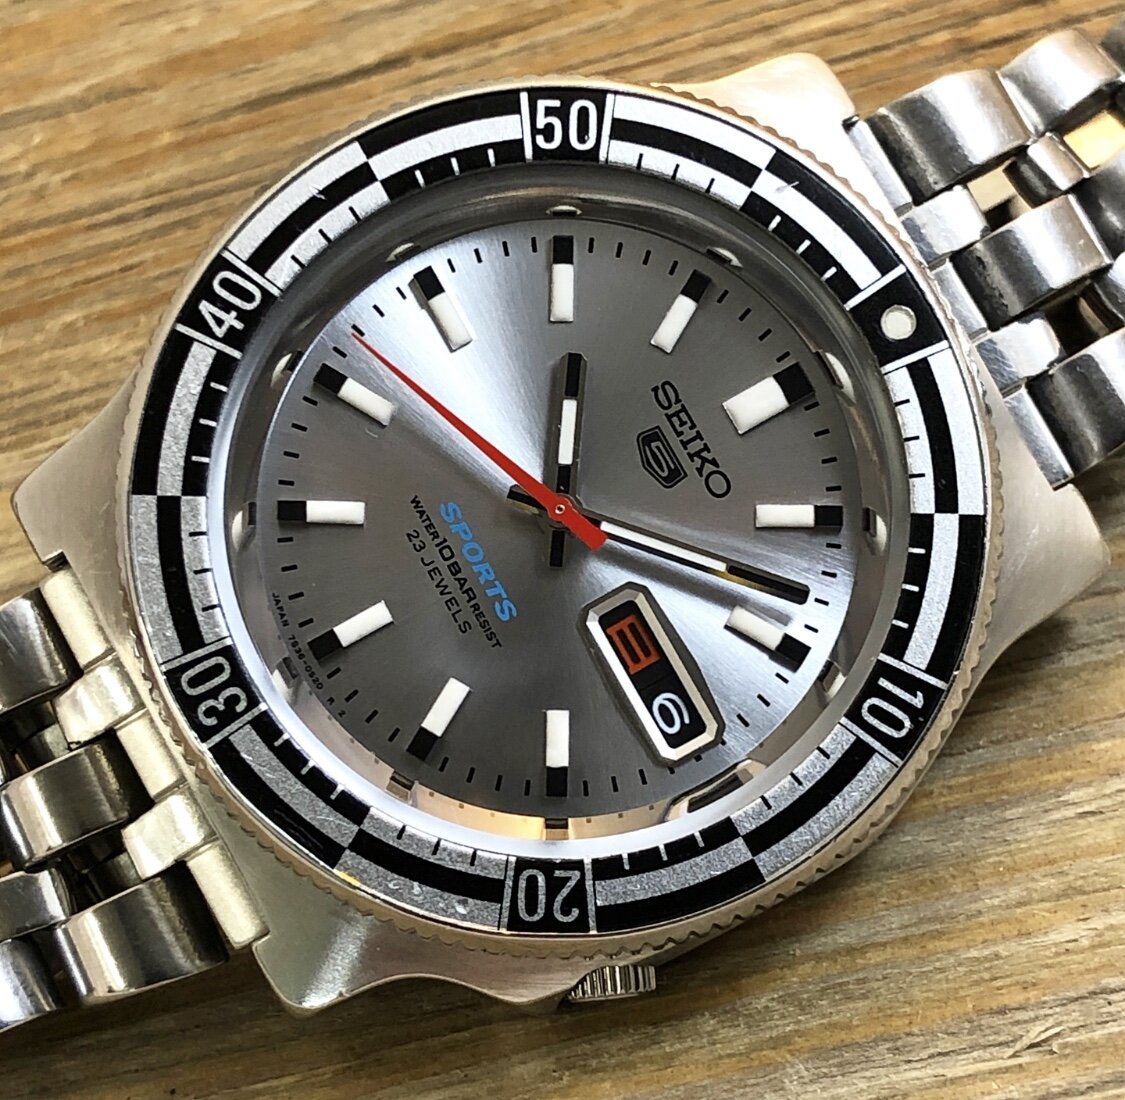 1997 JDM Seiko 7S36-0070 5 Sports 10BAR “Rally” (Re-Issue)